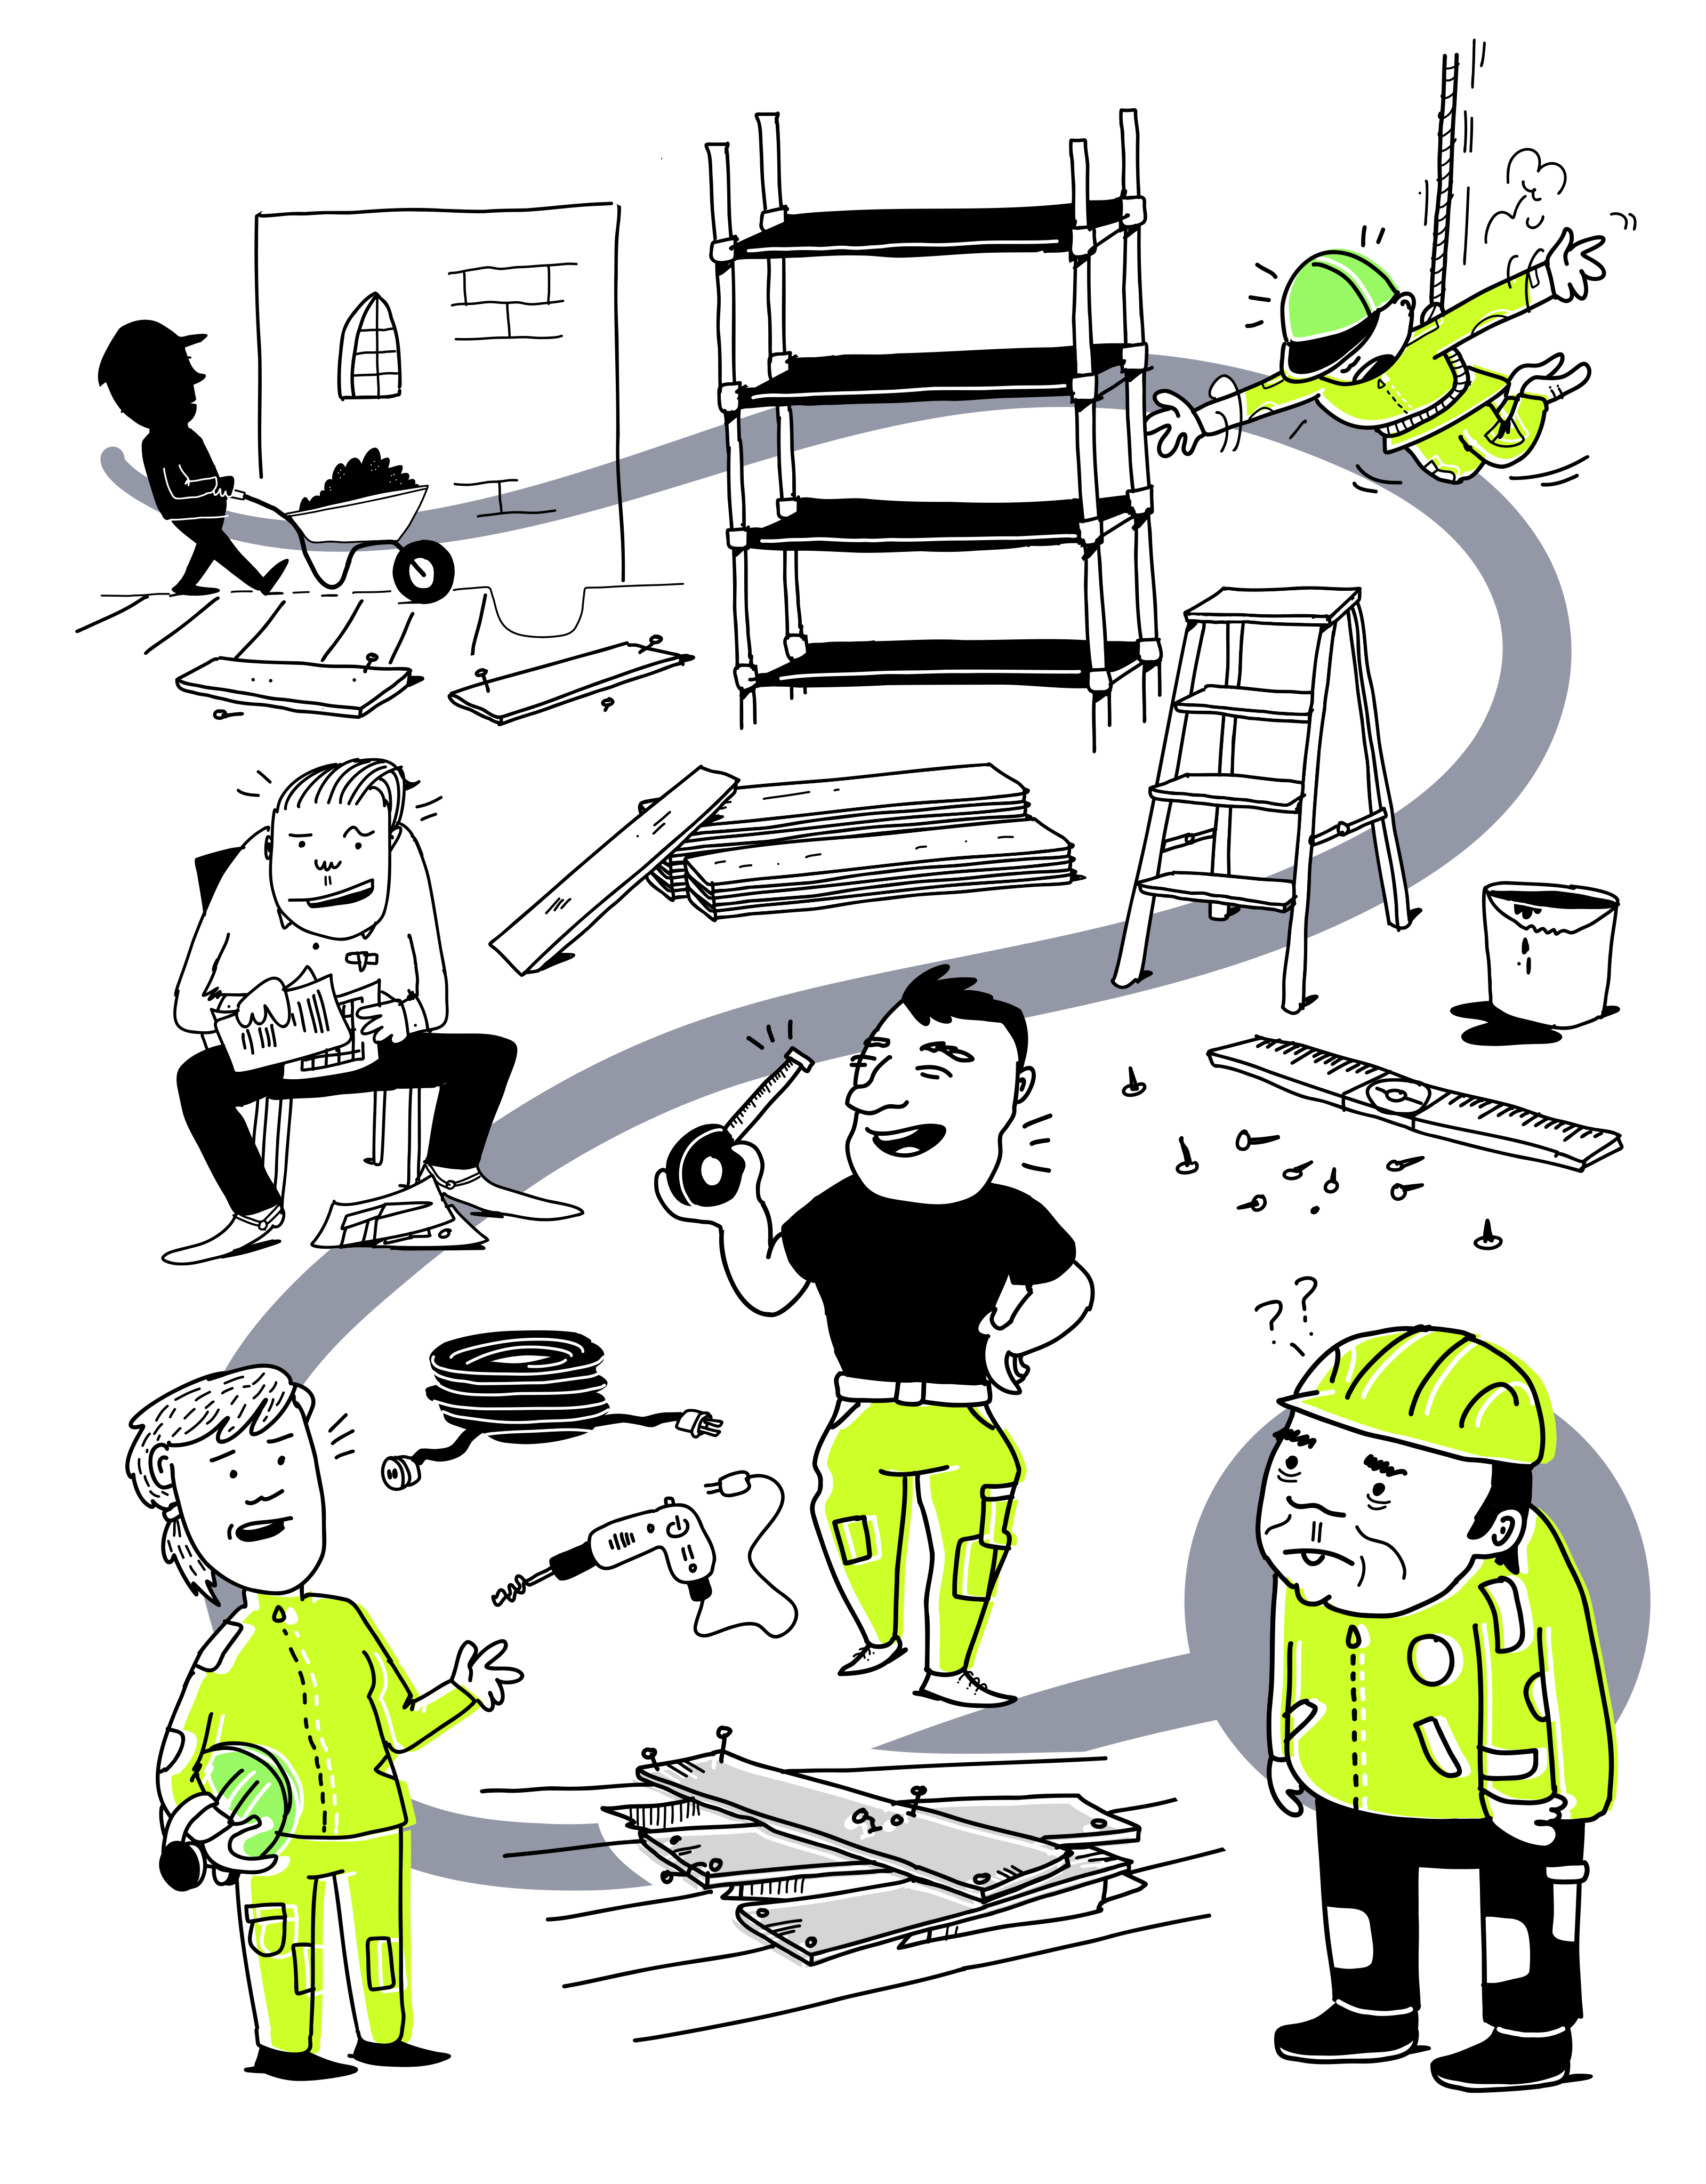 Cartoon of characters on building site